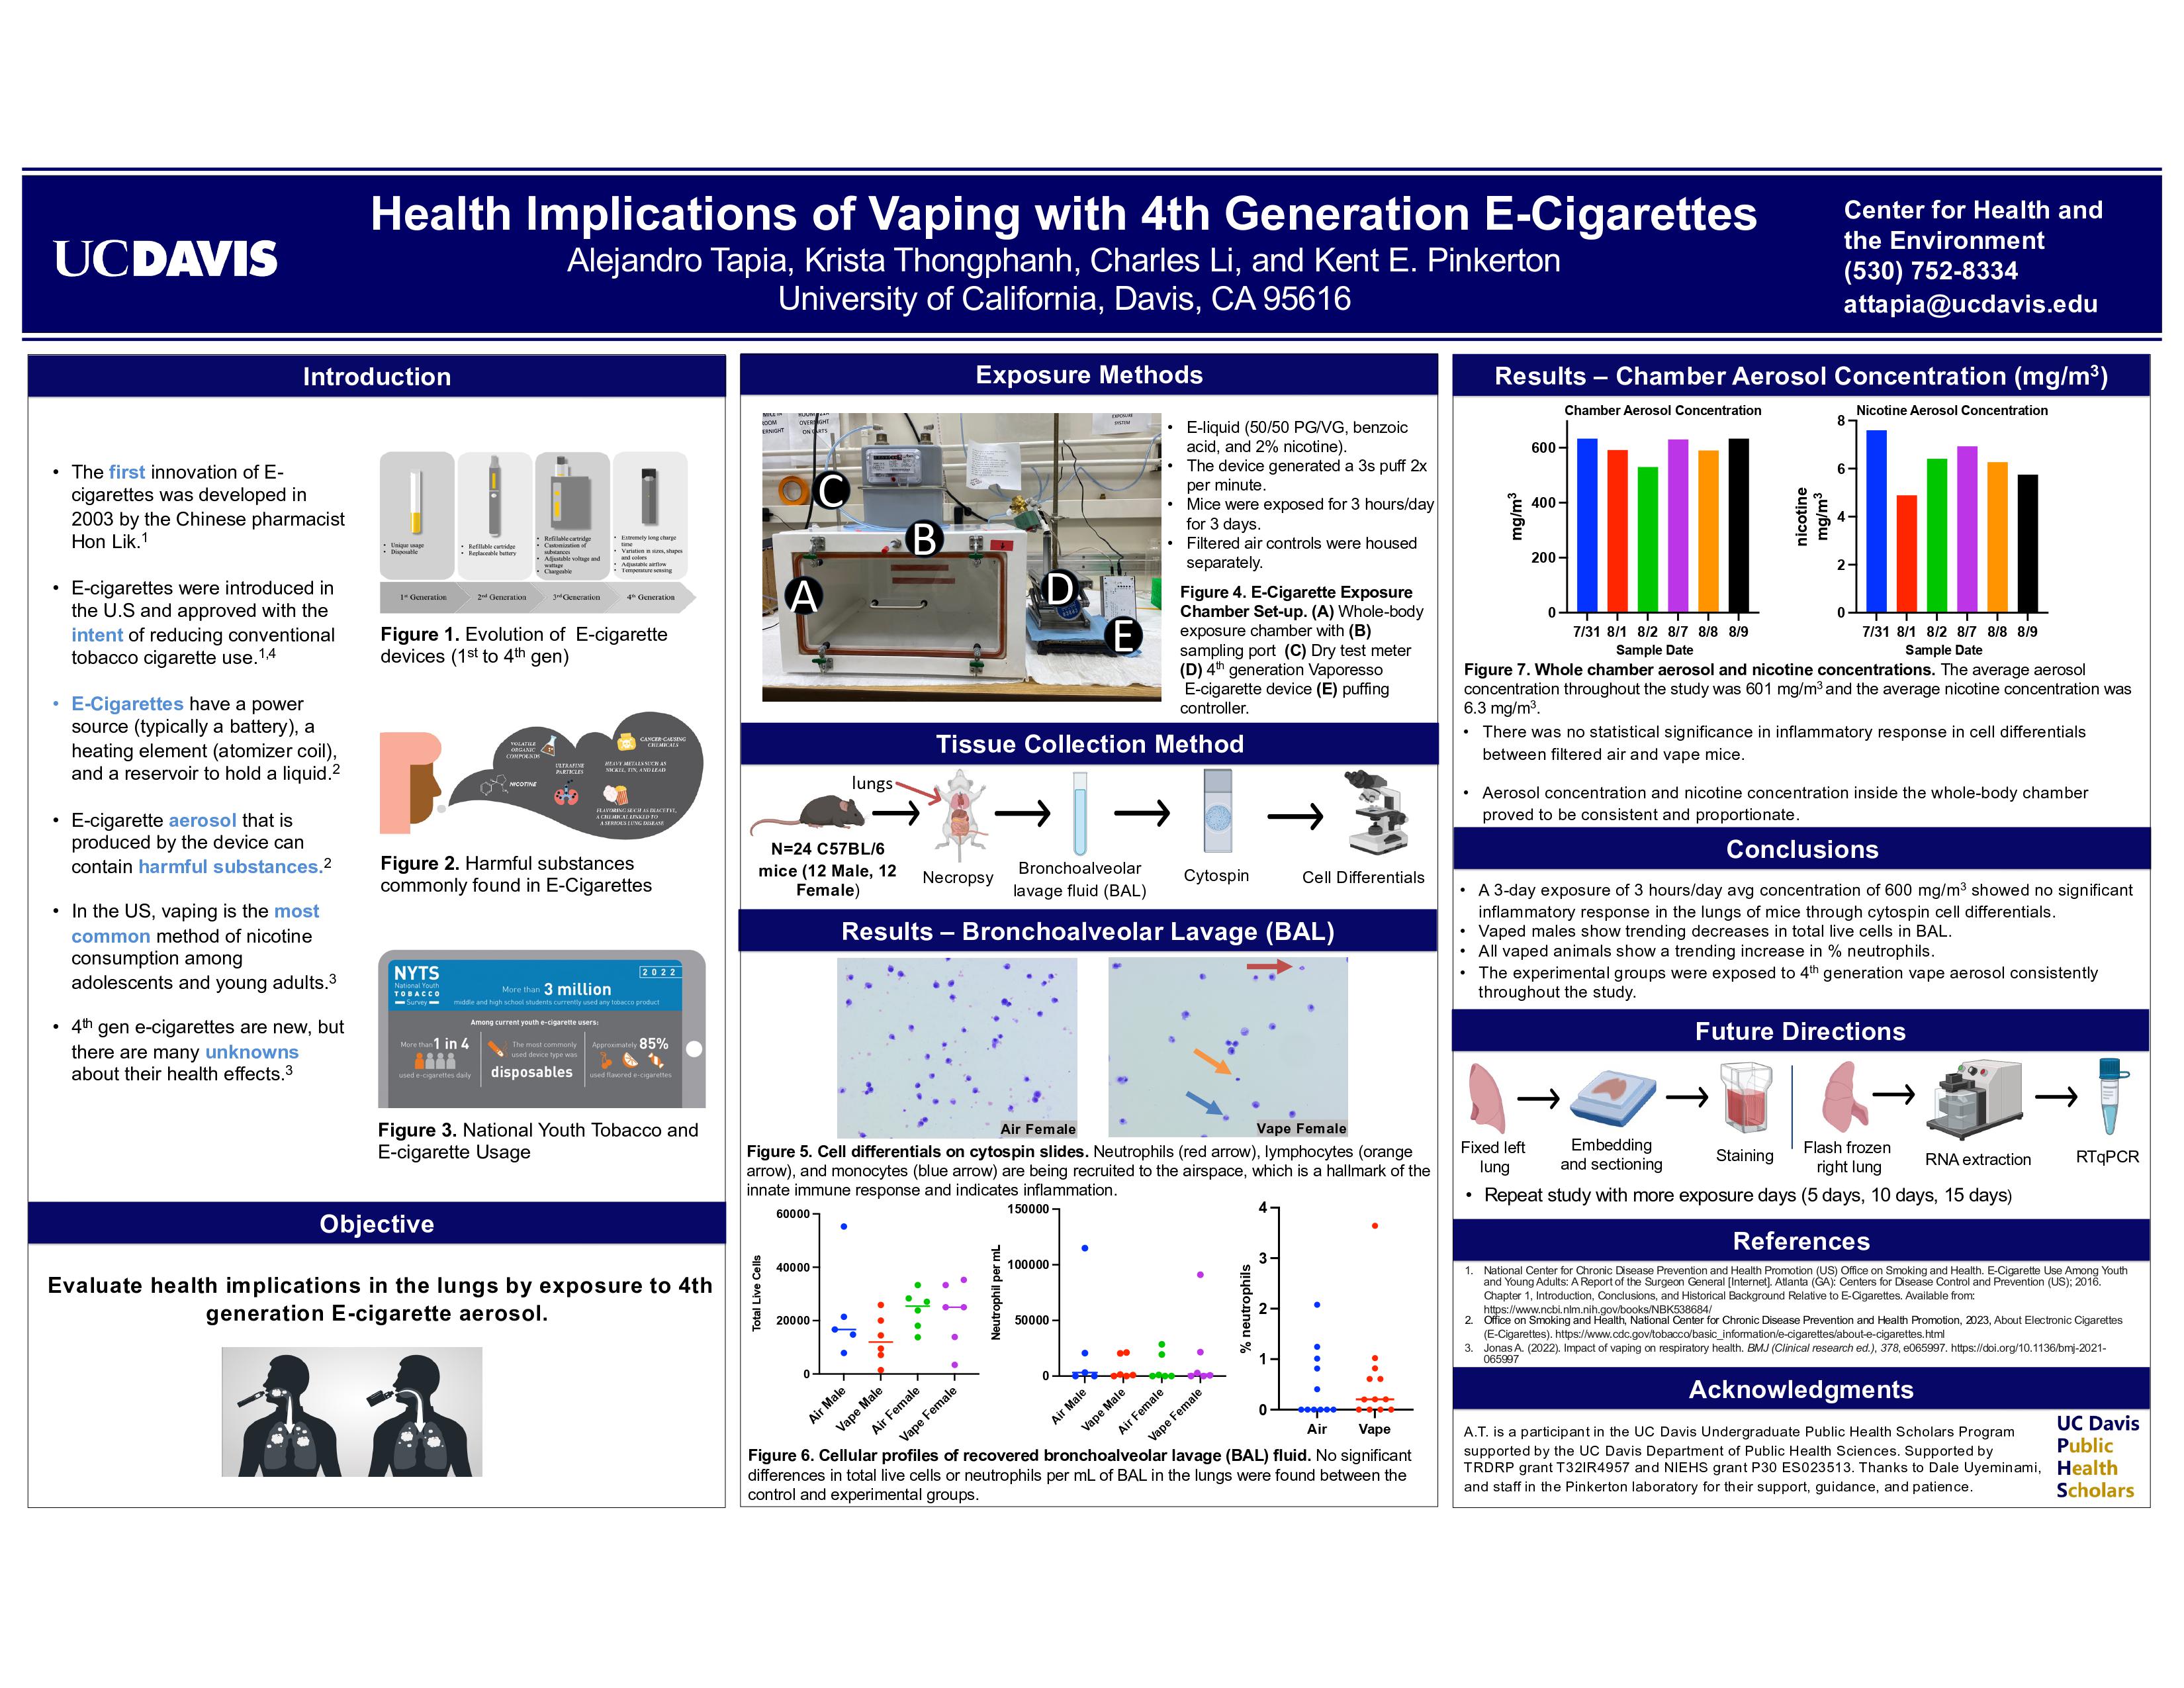 Alejandro's research poster